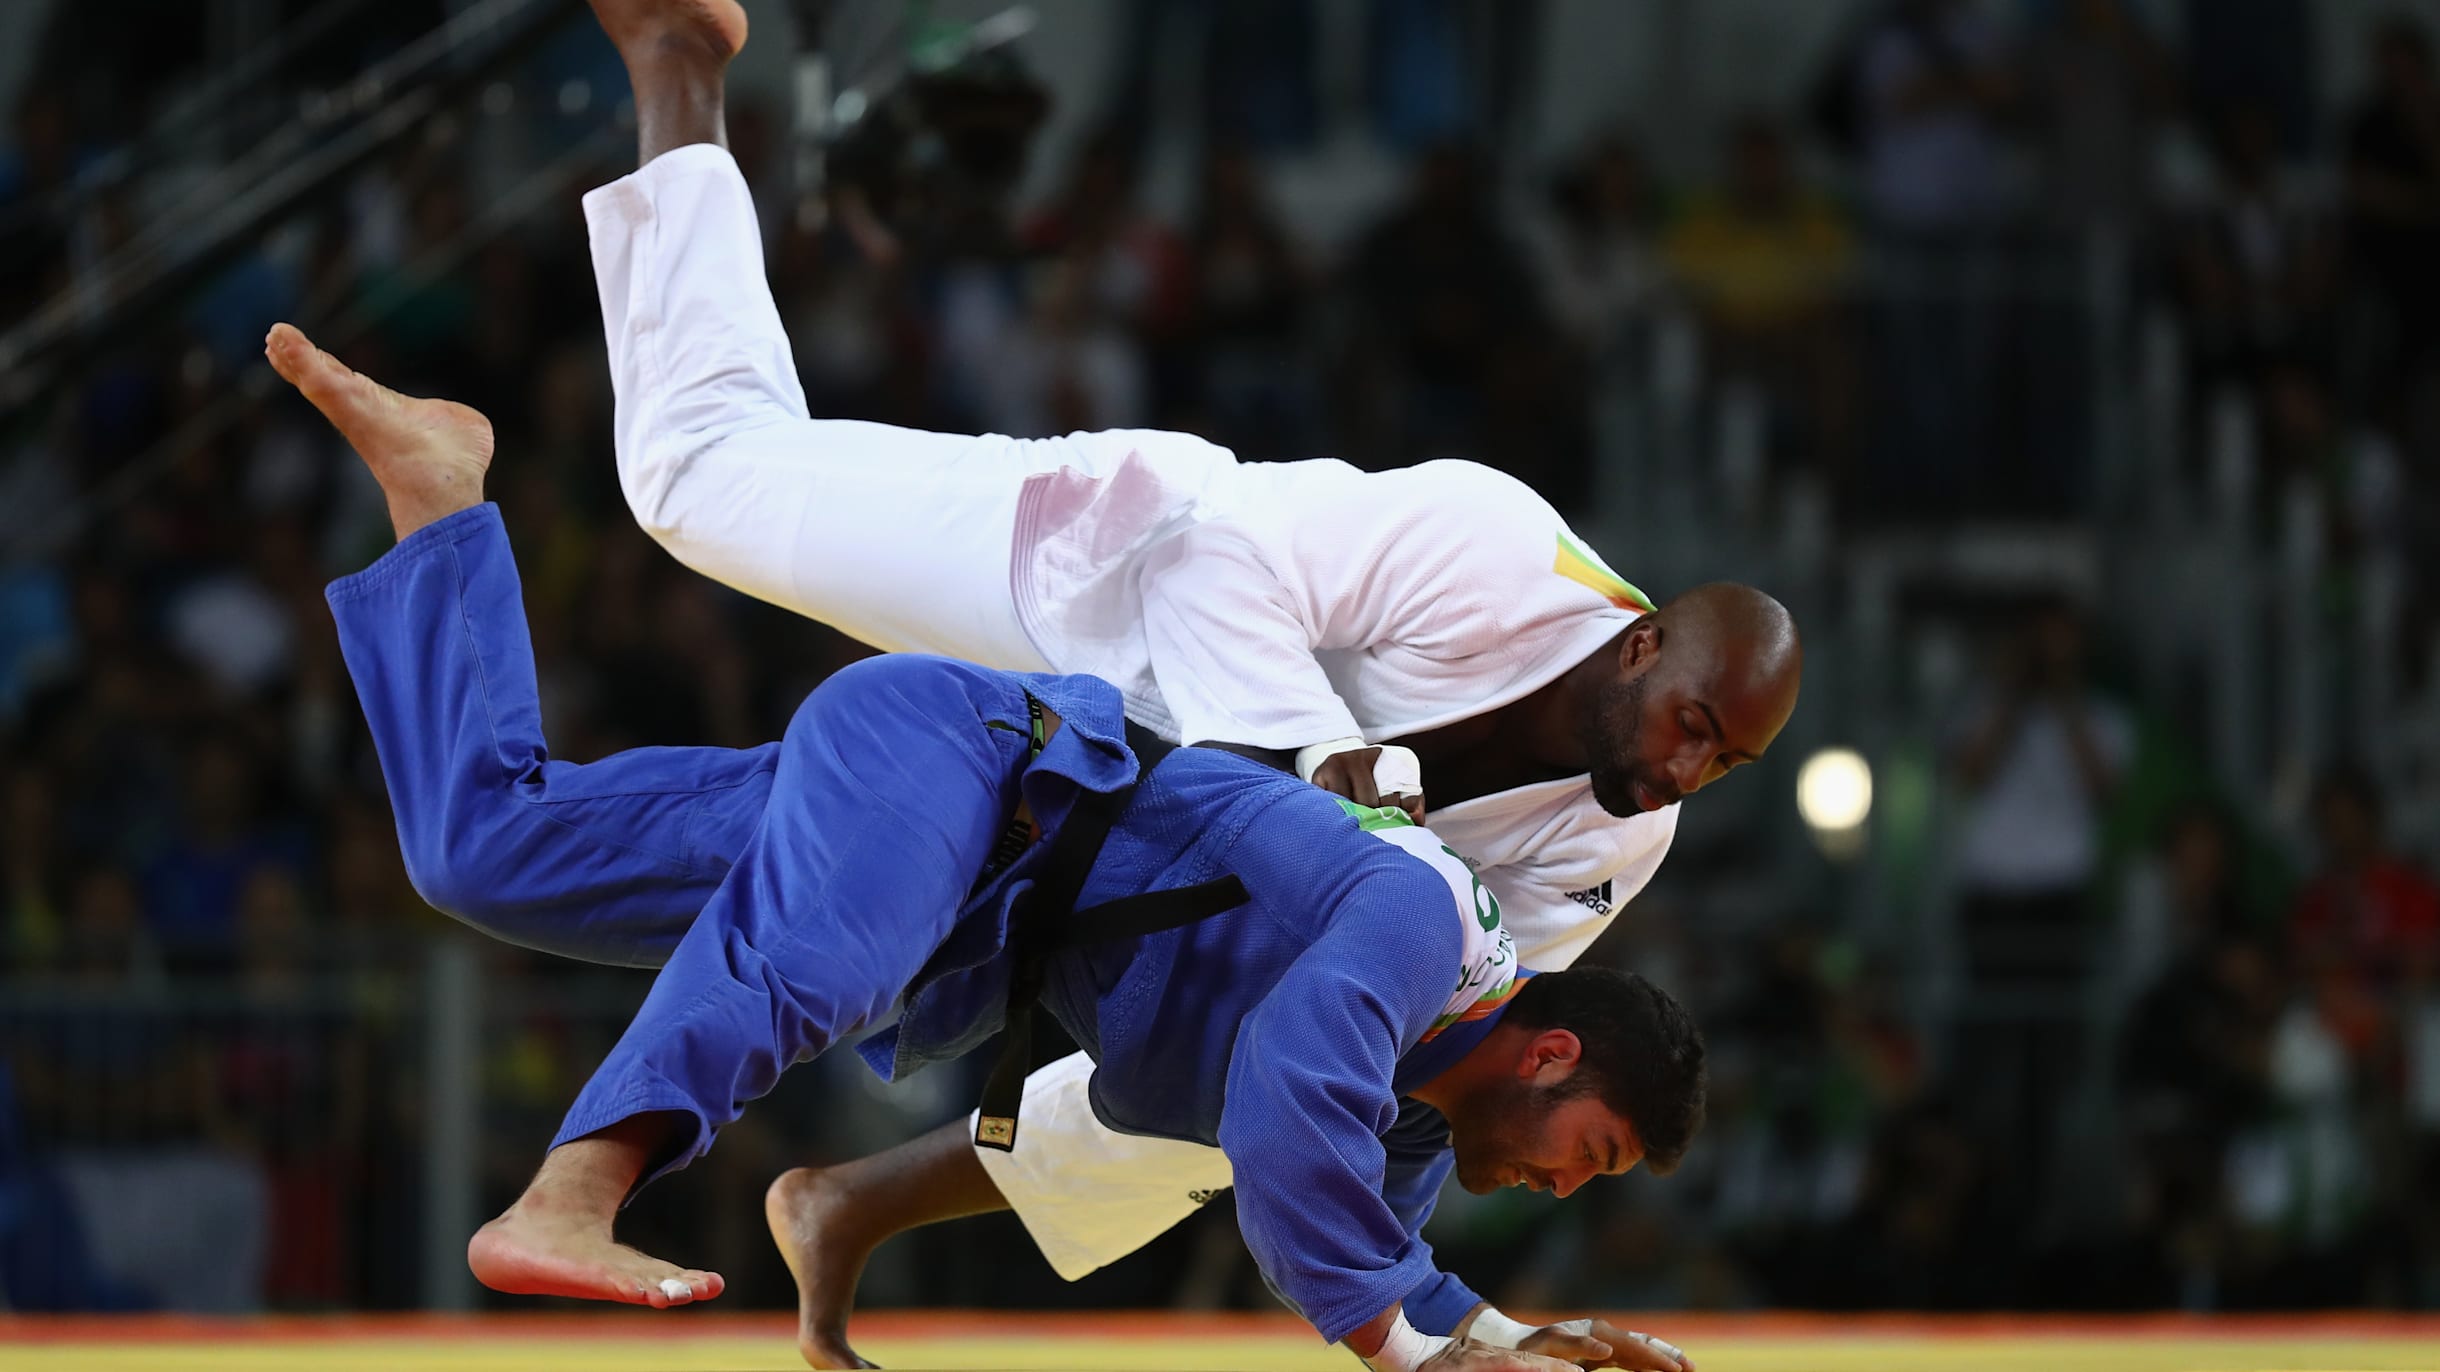 French judo legend Riner refreshed for Tokyo Olympics in 2021, 26 kg lighter